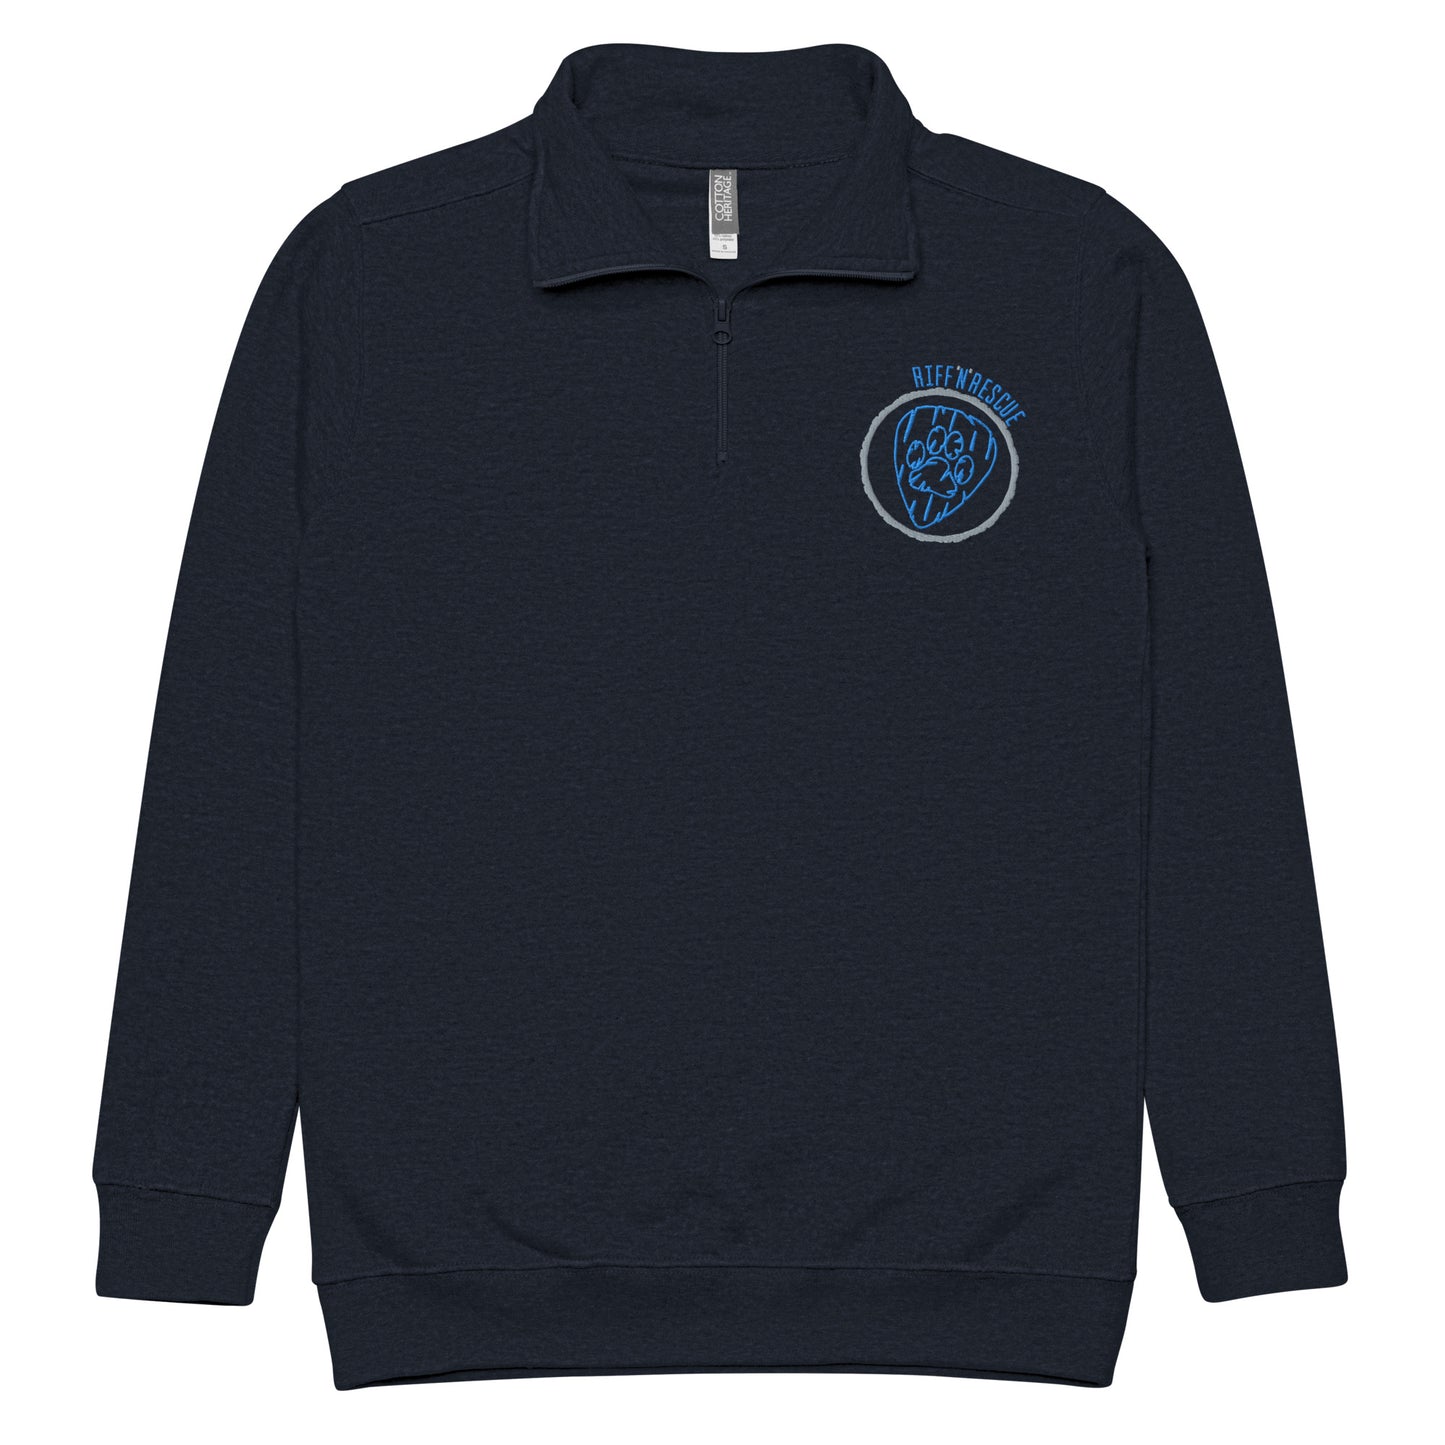 Bang Heads/Wag Tails Embroidered 1/4 Zip pullover (BLUE)